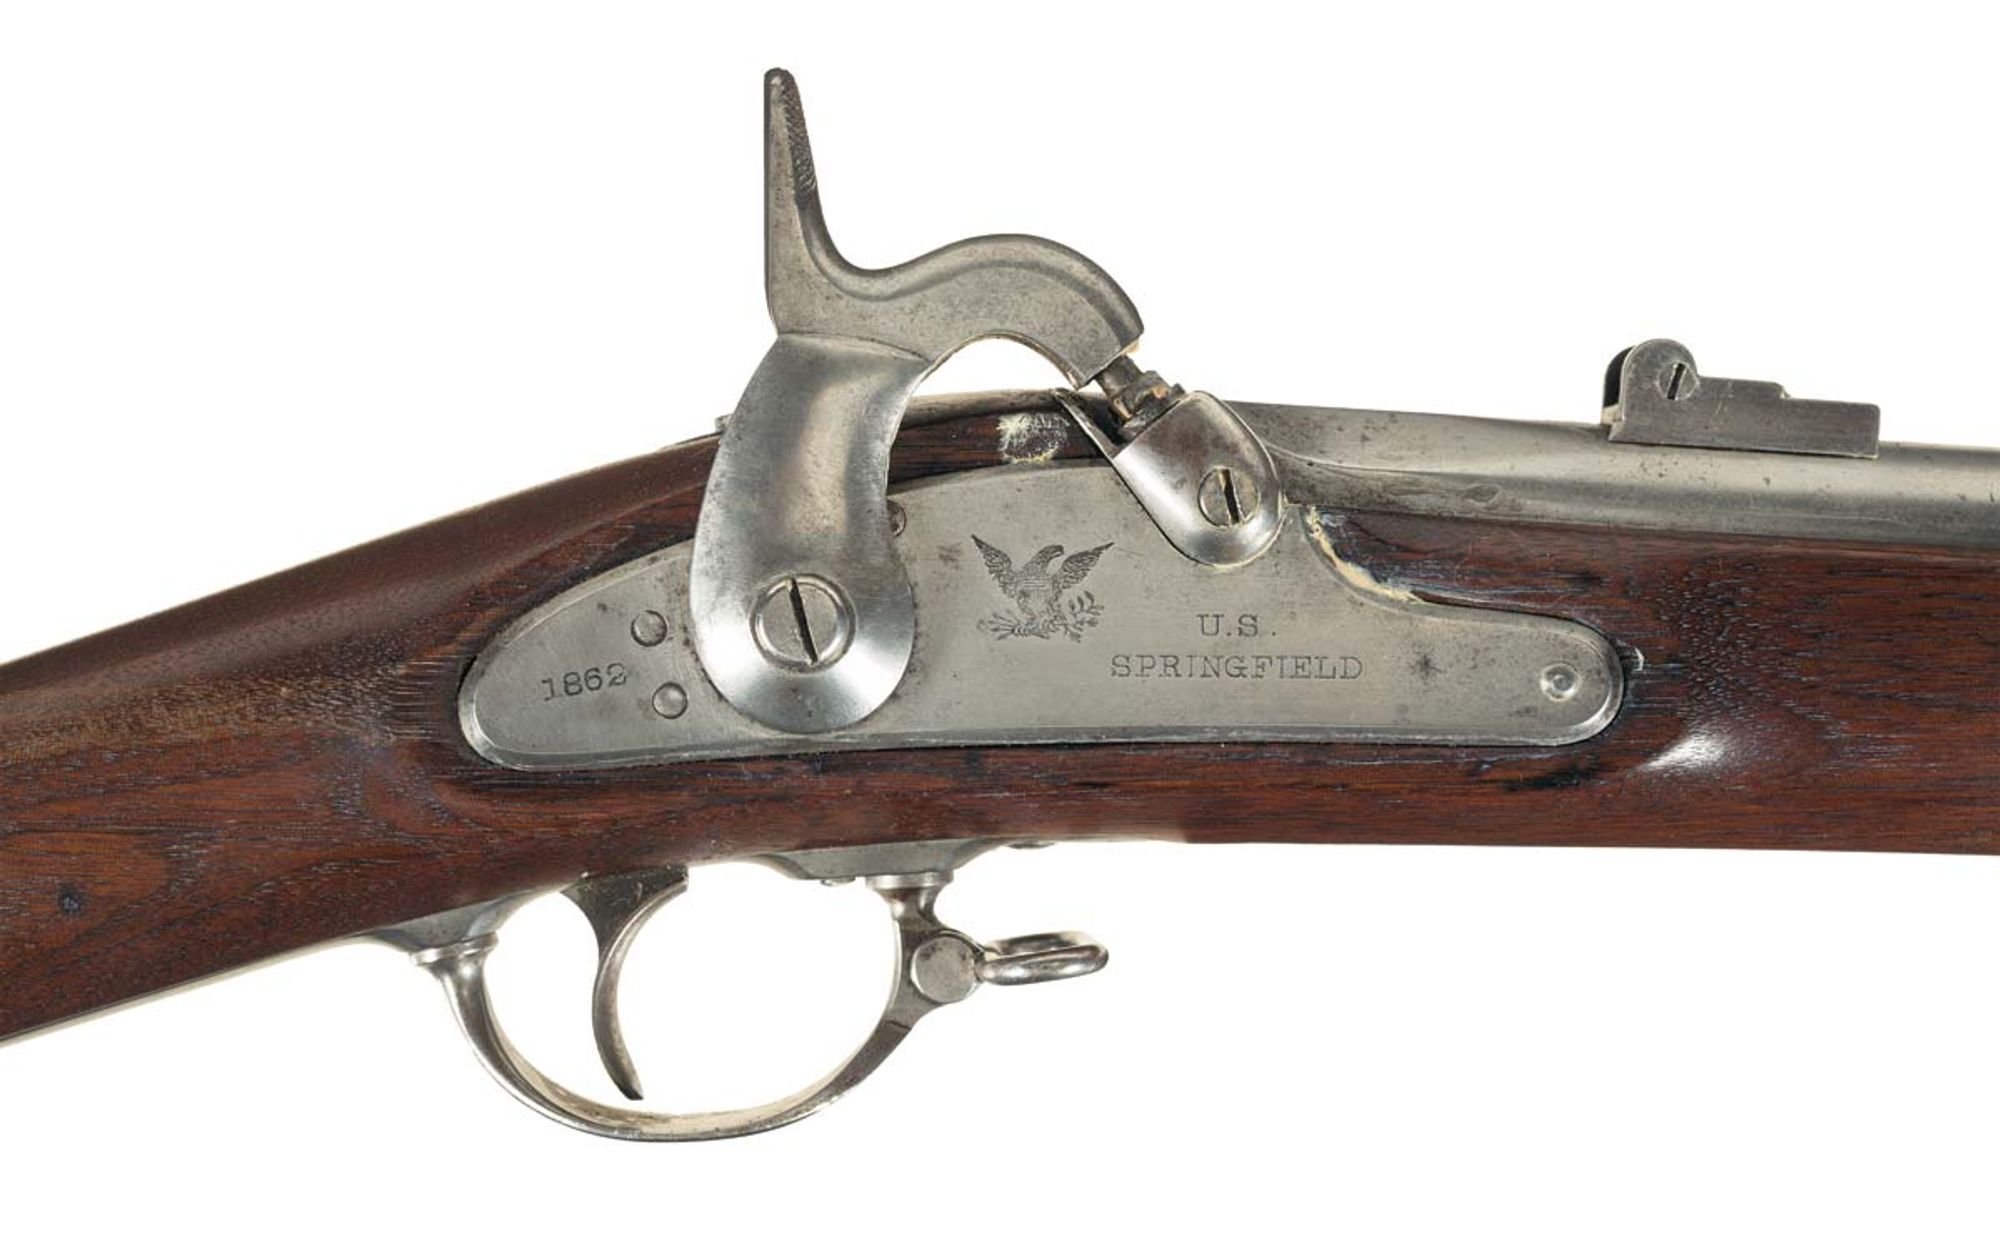 Lot 3101: Civil War U.S. Springfield Model 1861 Percussion Rifle-Musket with Bayonet The Springfield Model 1861 percussion rifled musket was the most used rifle by the Union in the Civil War. It is not difficult to see its relation to the Model 1873.